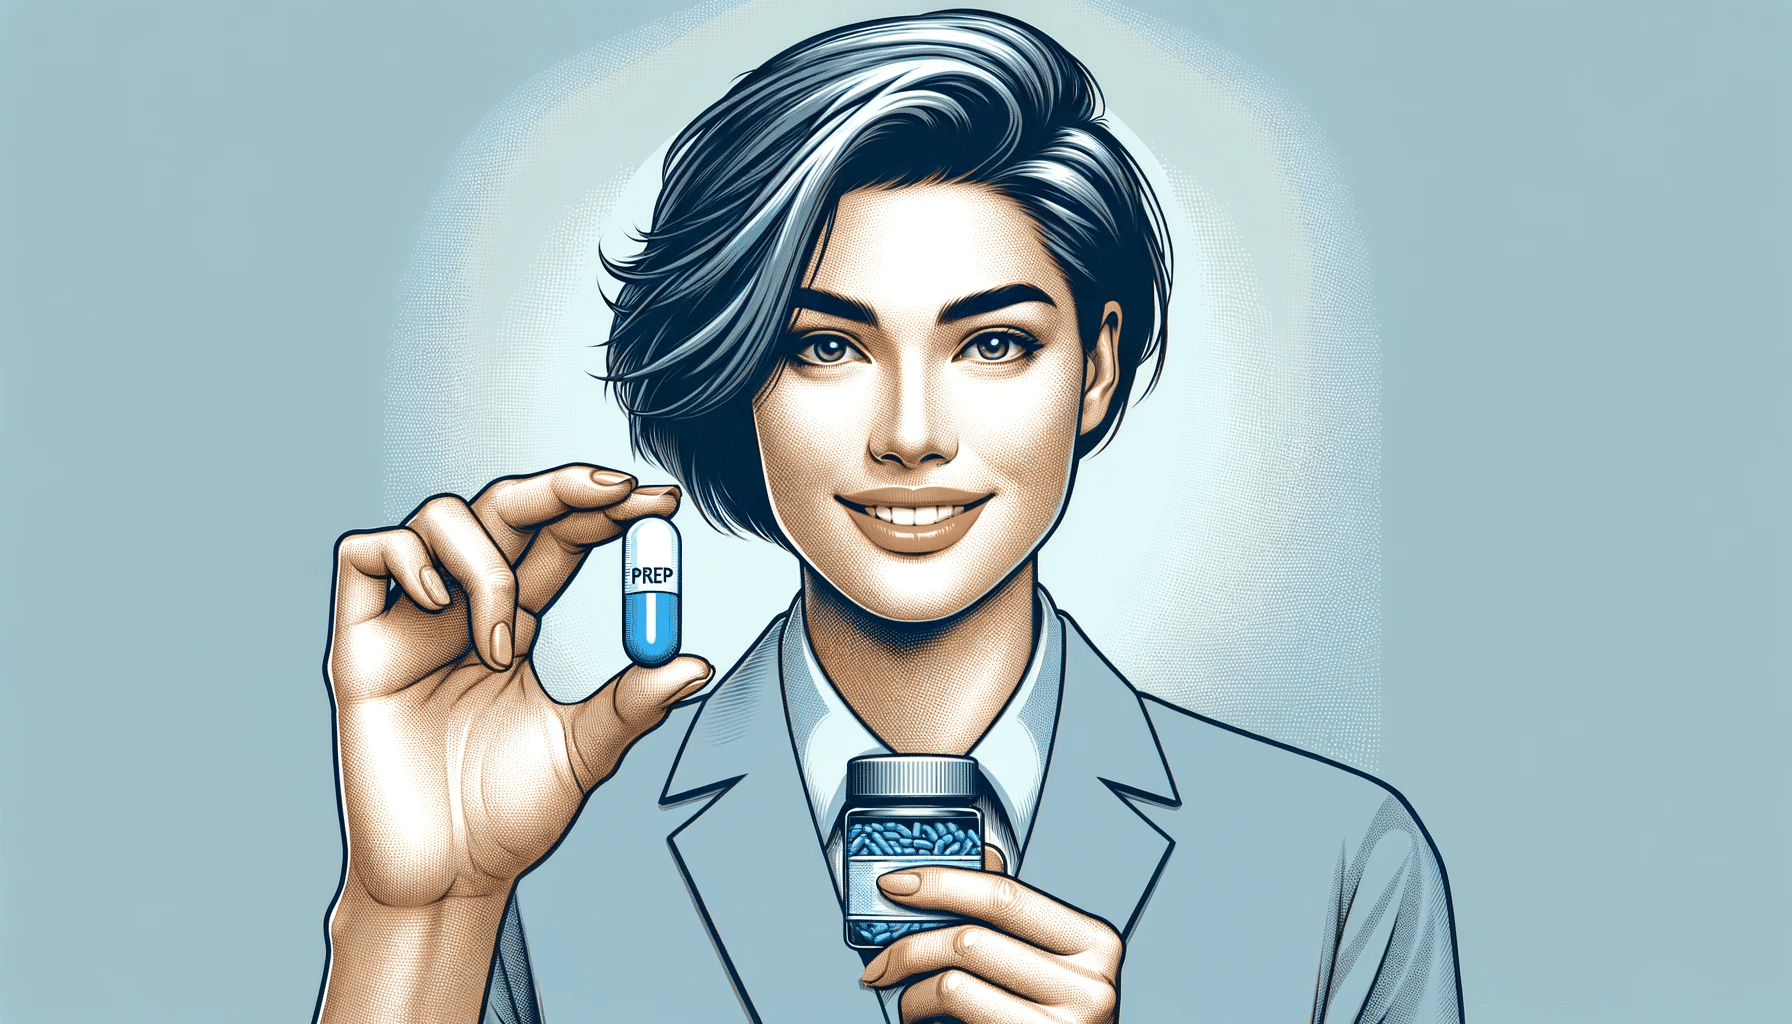 Create a high resolution horizontal image of a person in the background holding a pill with the word Prep inscribed on it. The person should appear